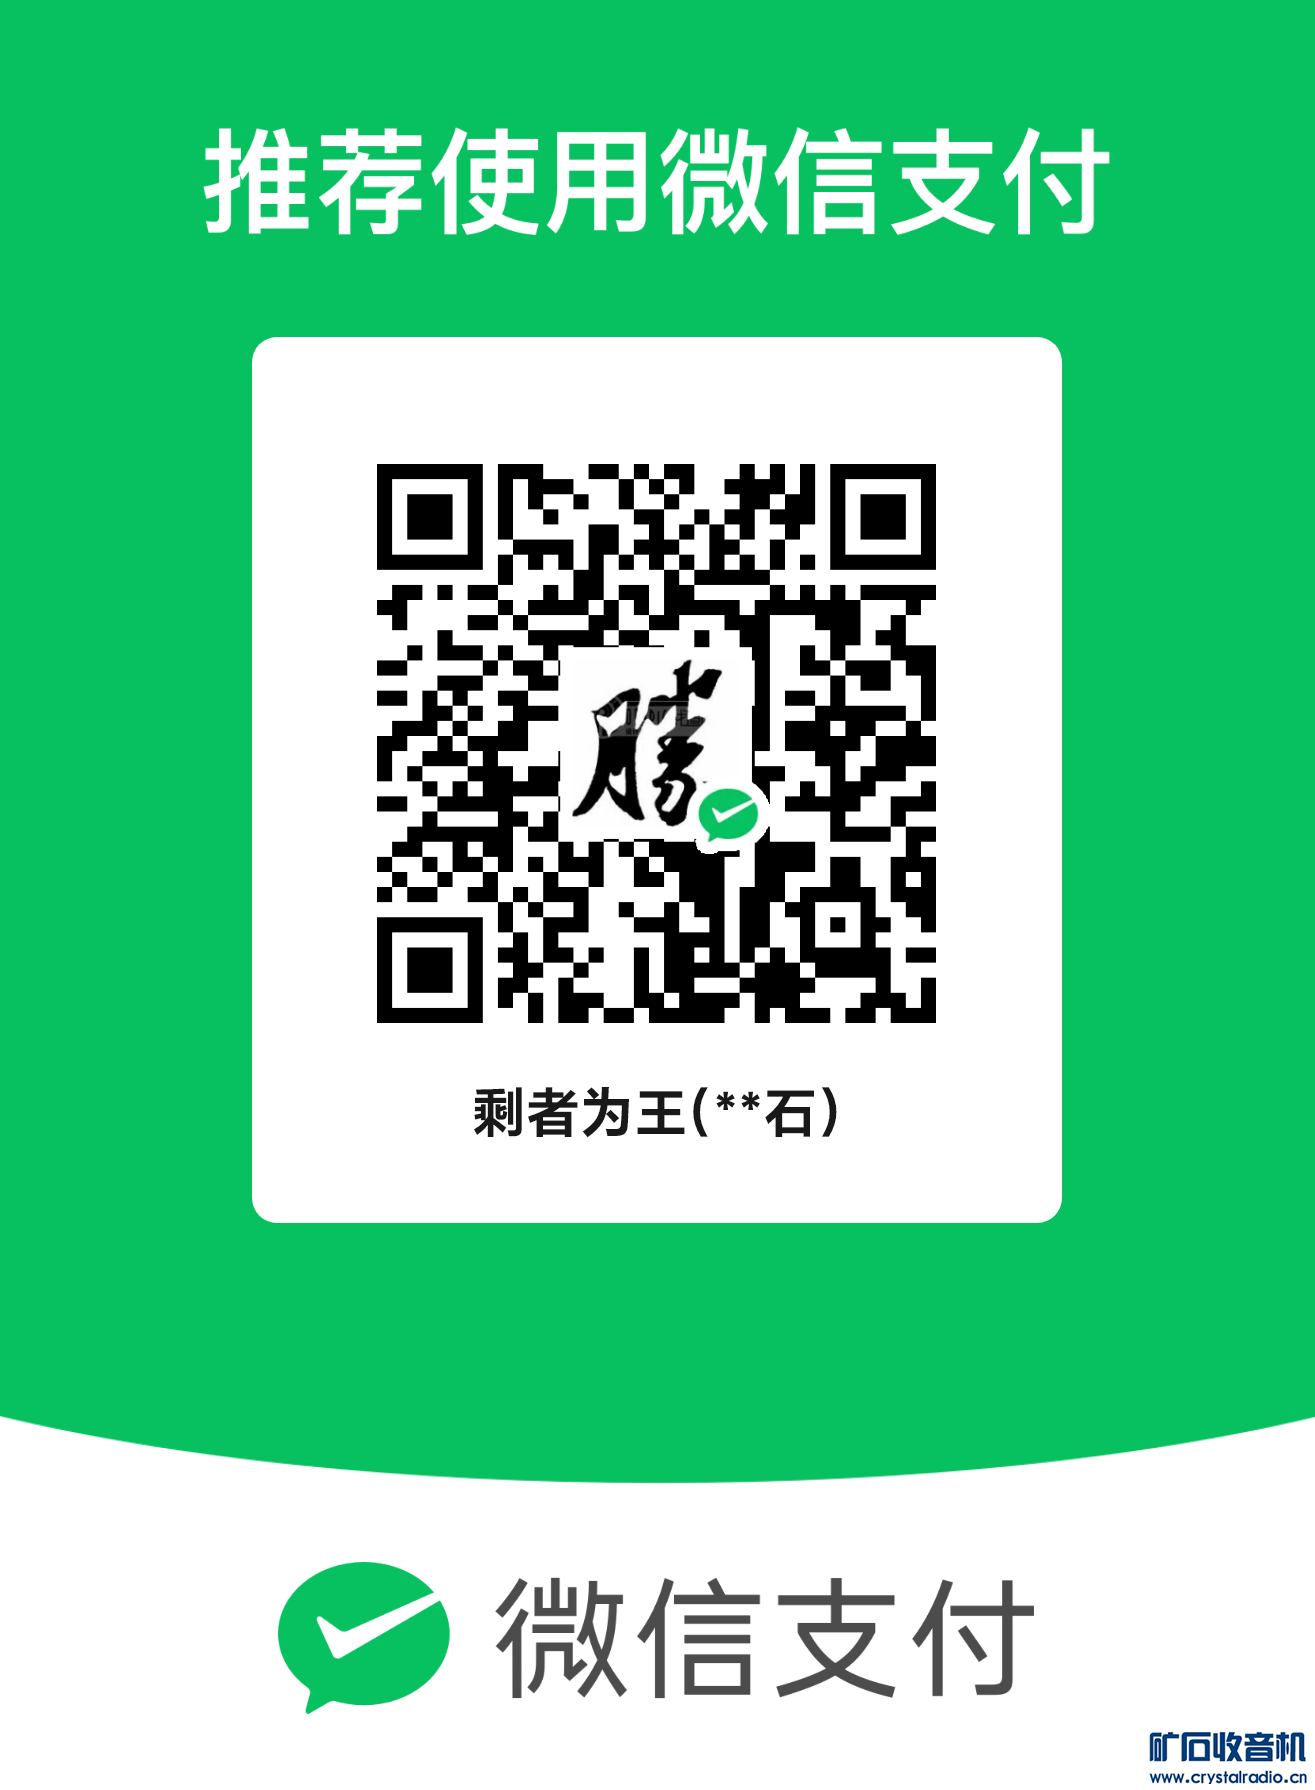 mm_facetoface_collect_qrcode_1681167309498.png